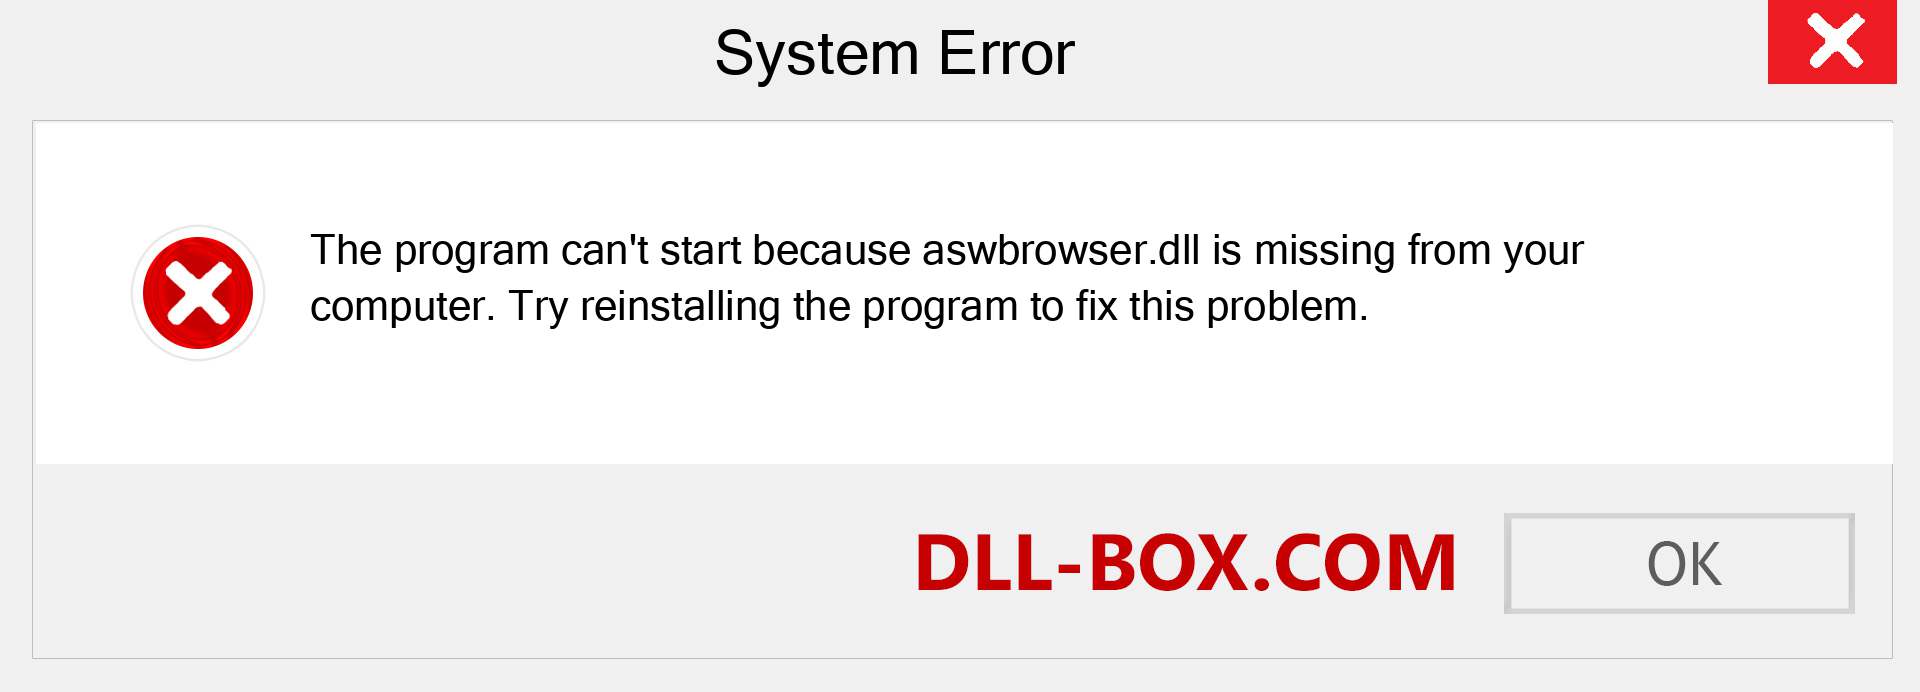  aswbrowser.dll file is missing?. Download for Windows 7, 8, 10 - Fix  aswbrowser dll Missing Error on Windows, photos, images